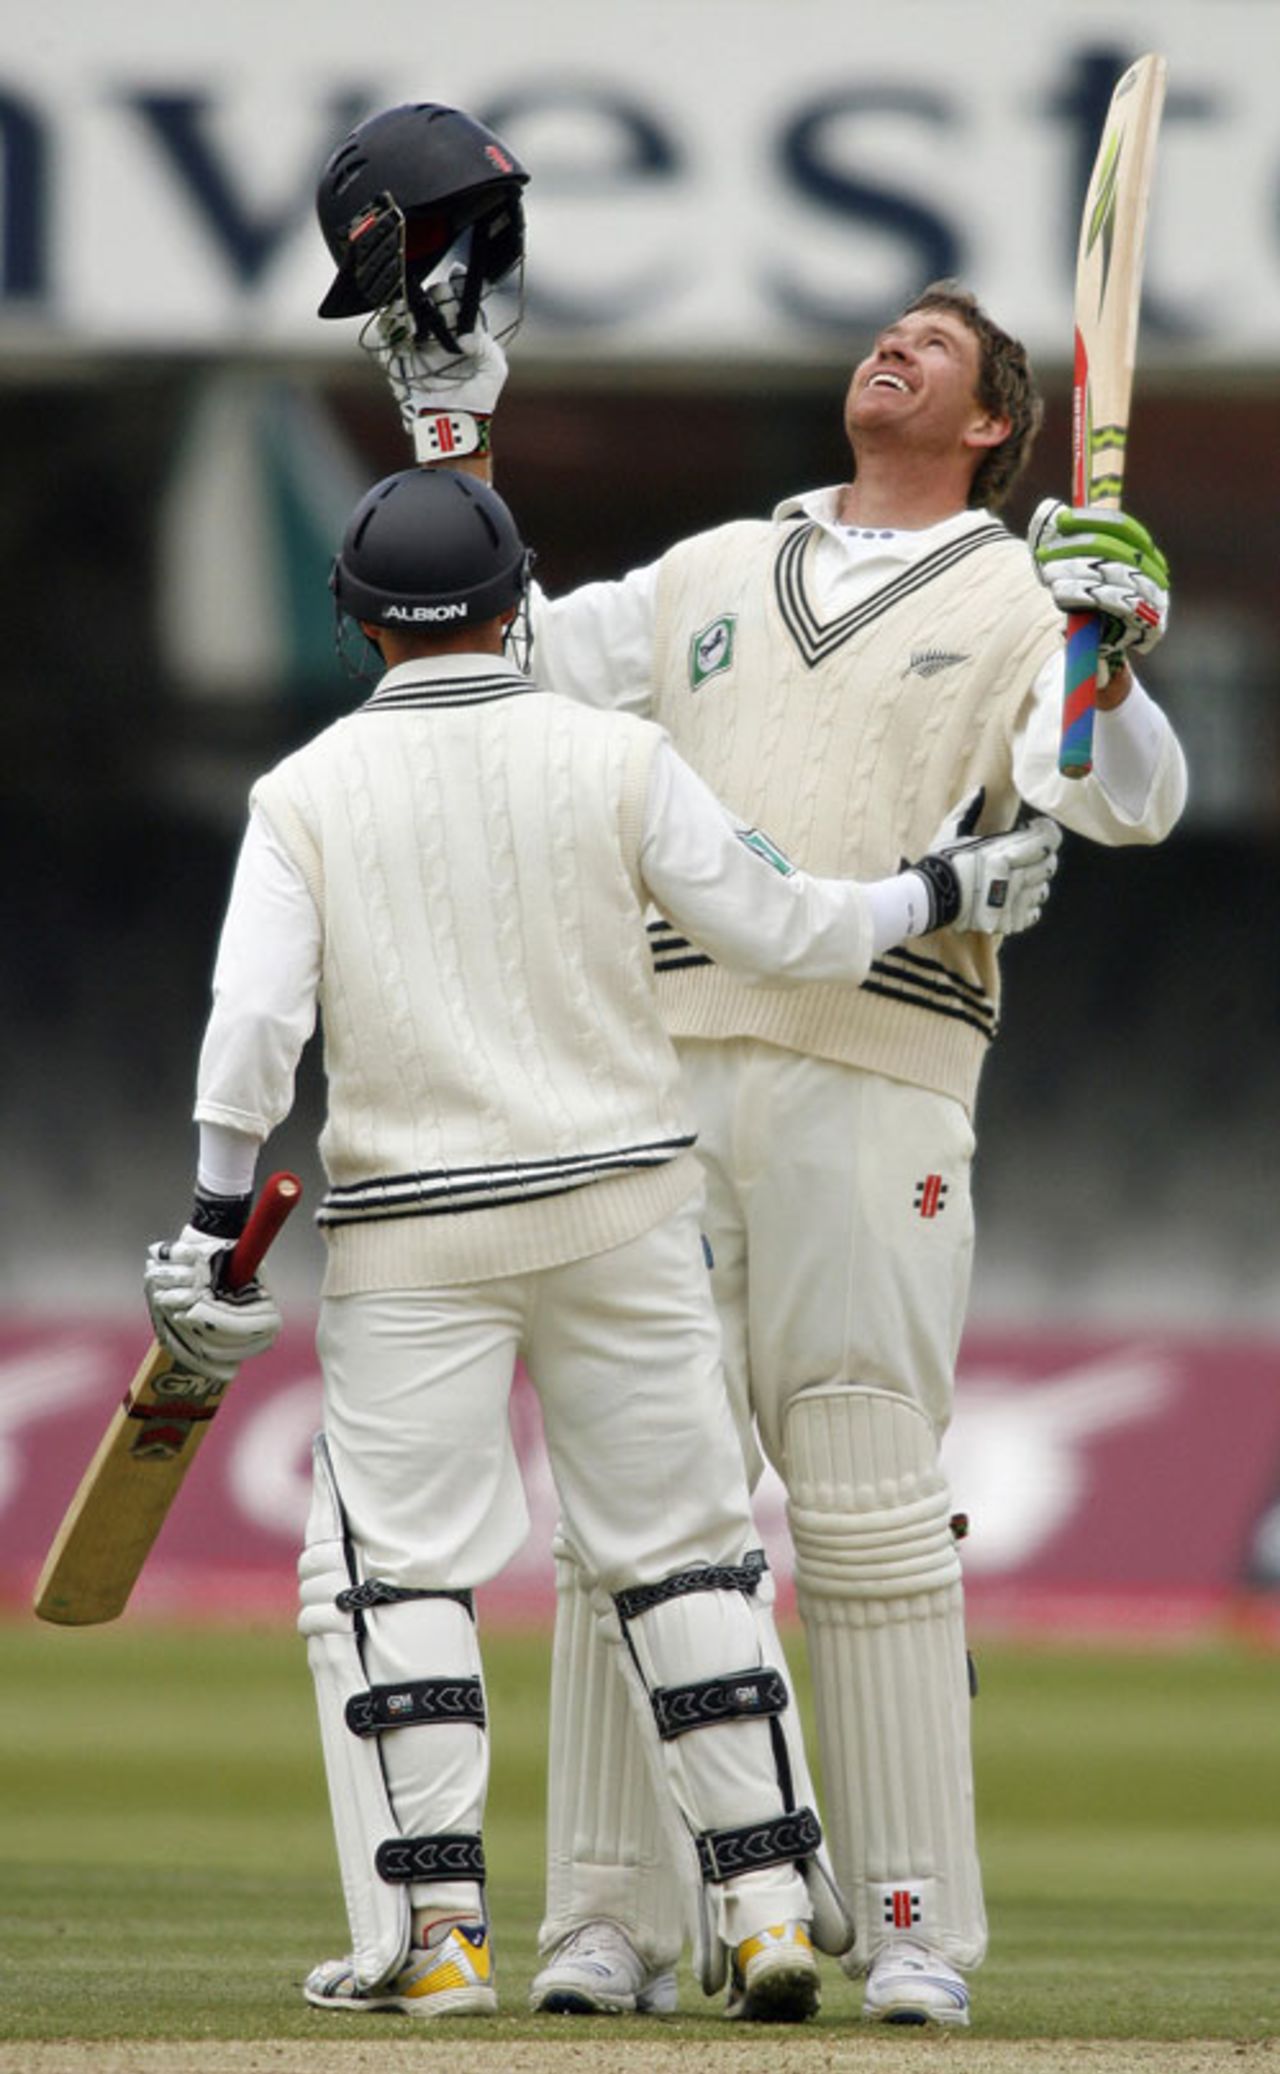 Jacob Oram is congratulated on his first Test century against England, England v New Zealand, 1st Test, Lord's, May 19, 2008